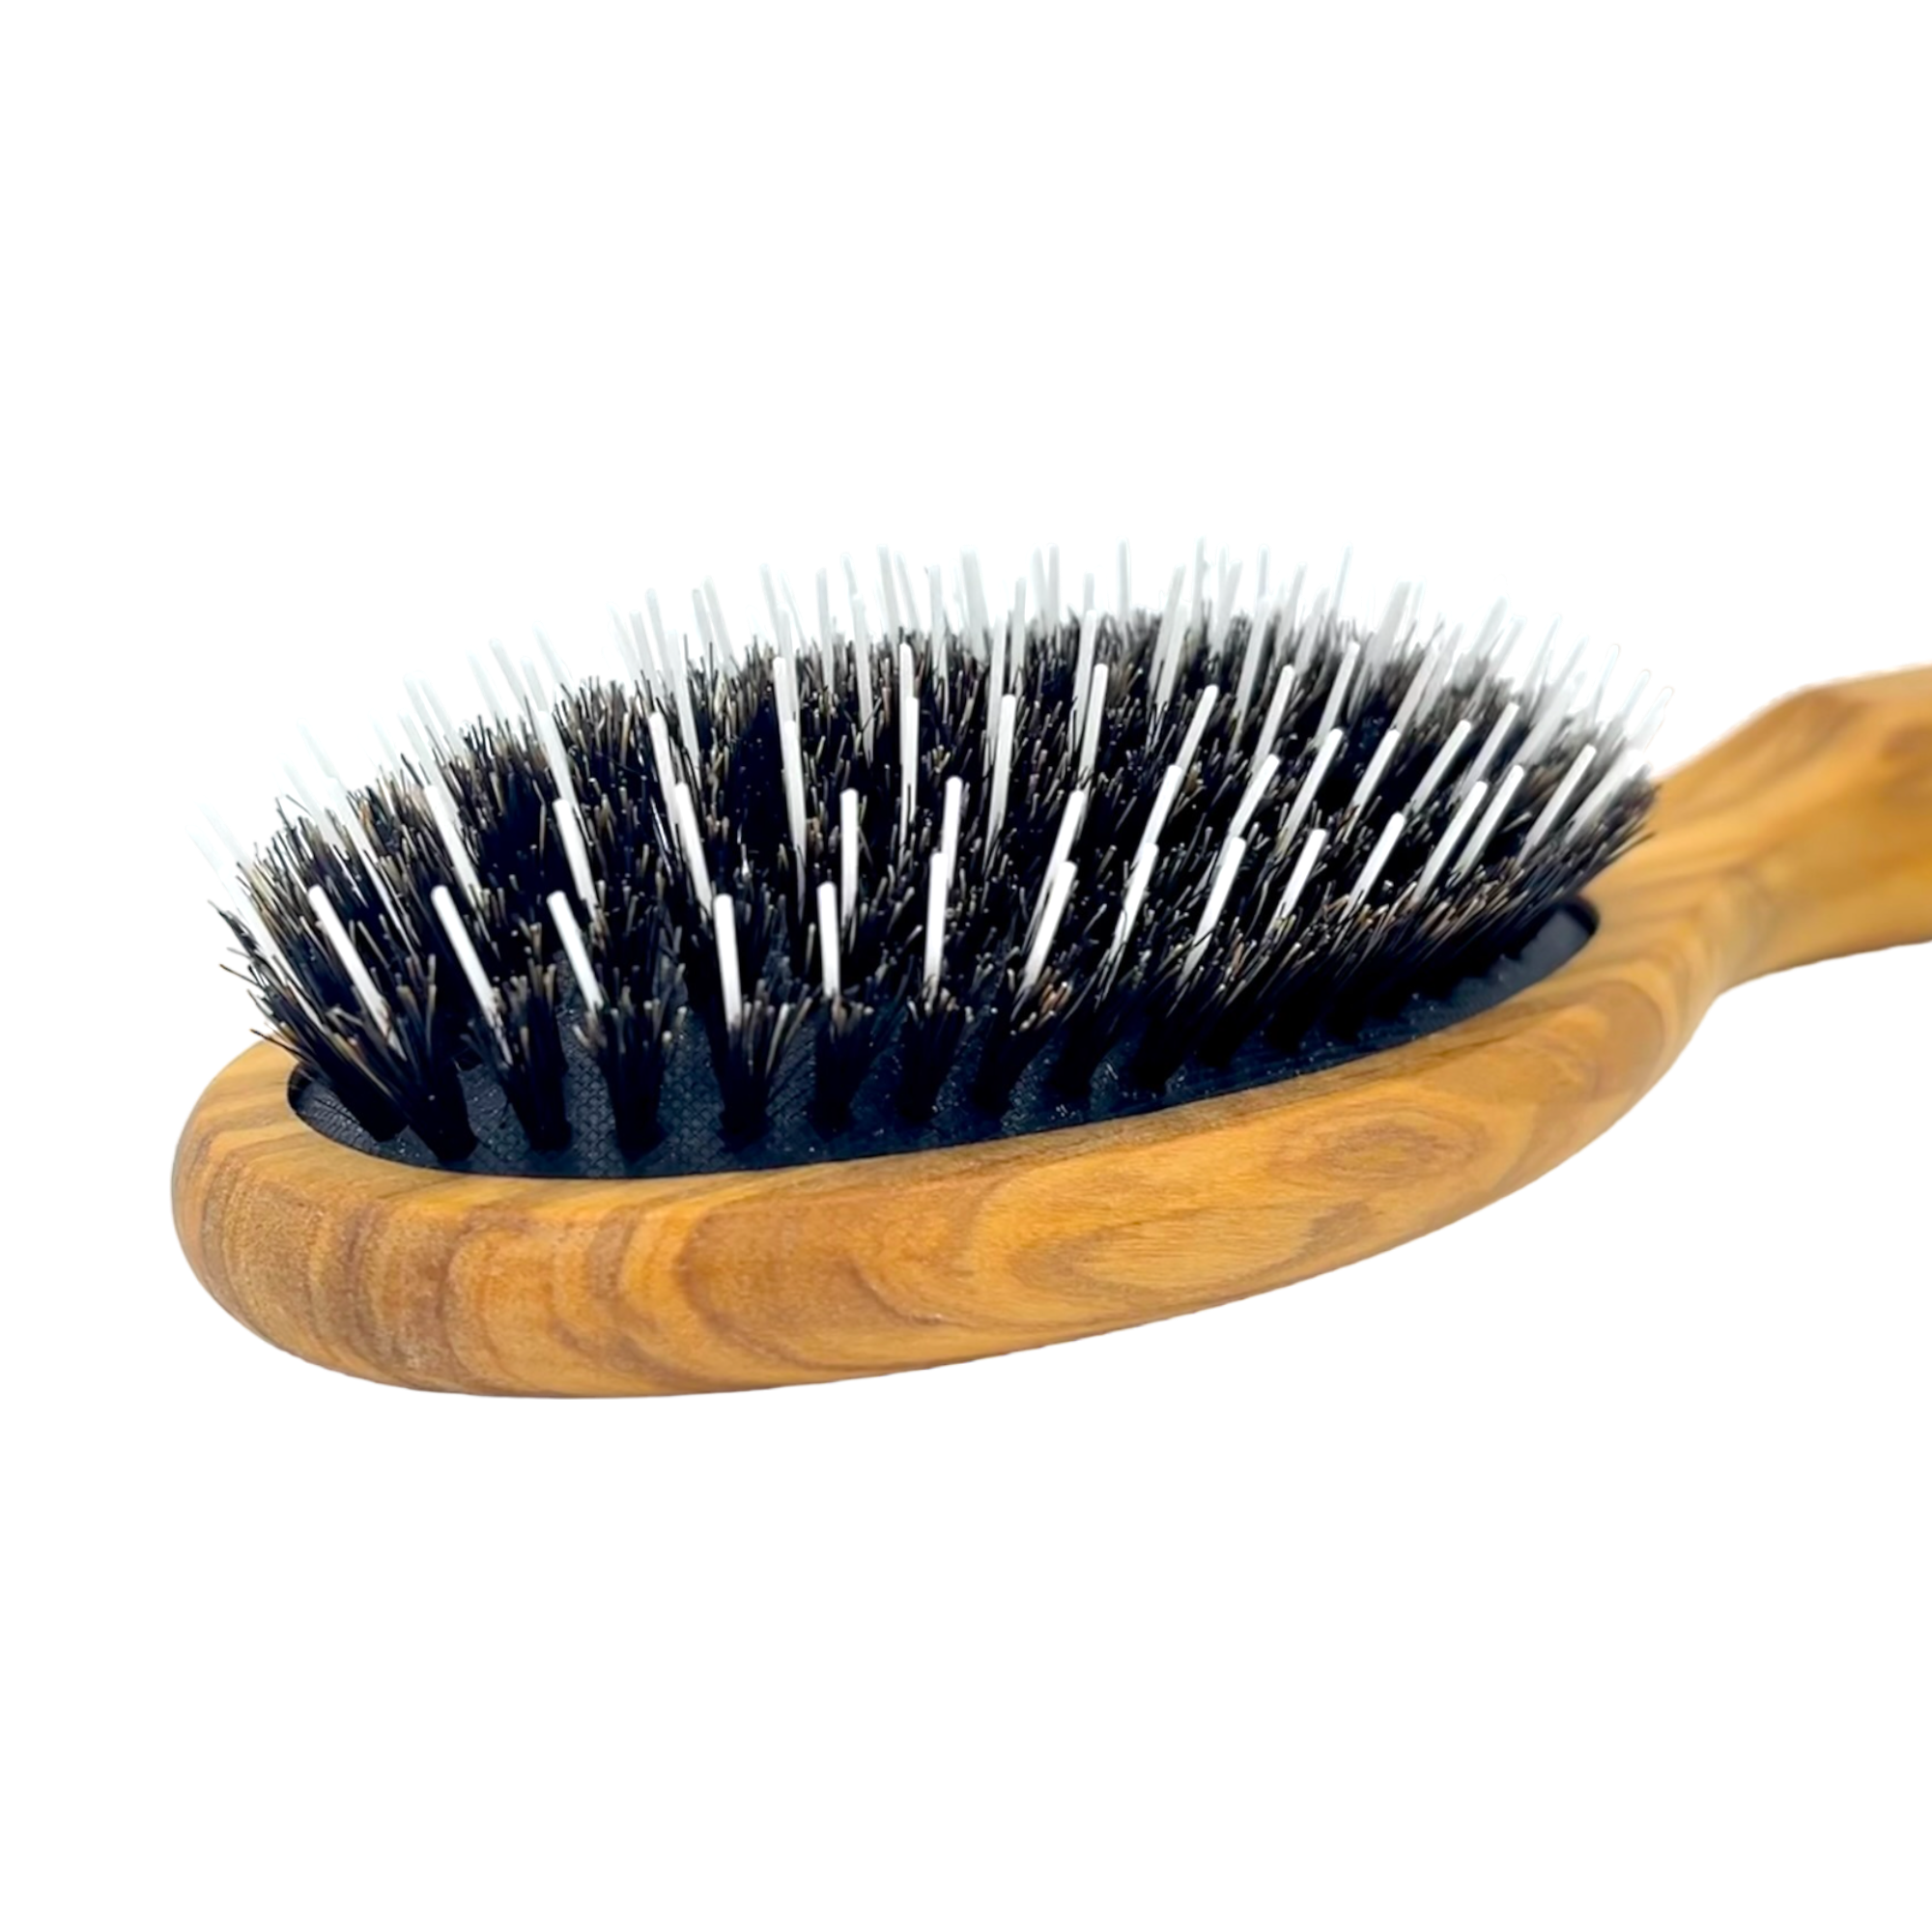 Dural Olive wood rubber cushion hair brush with boar bristles and nylon